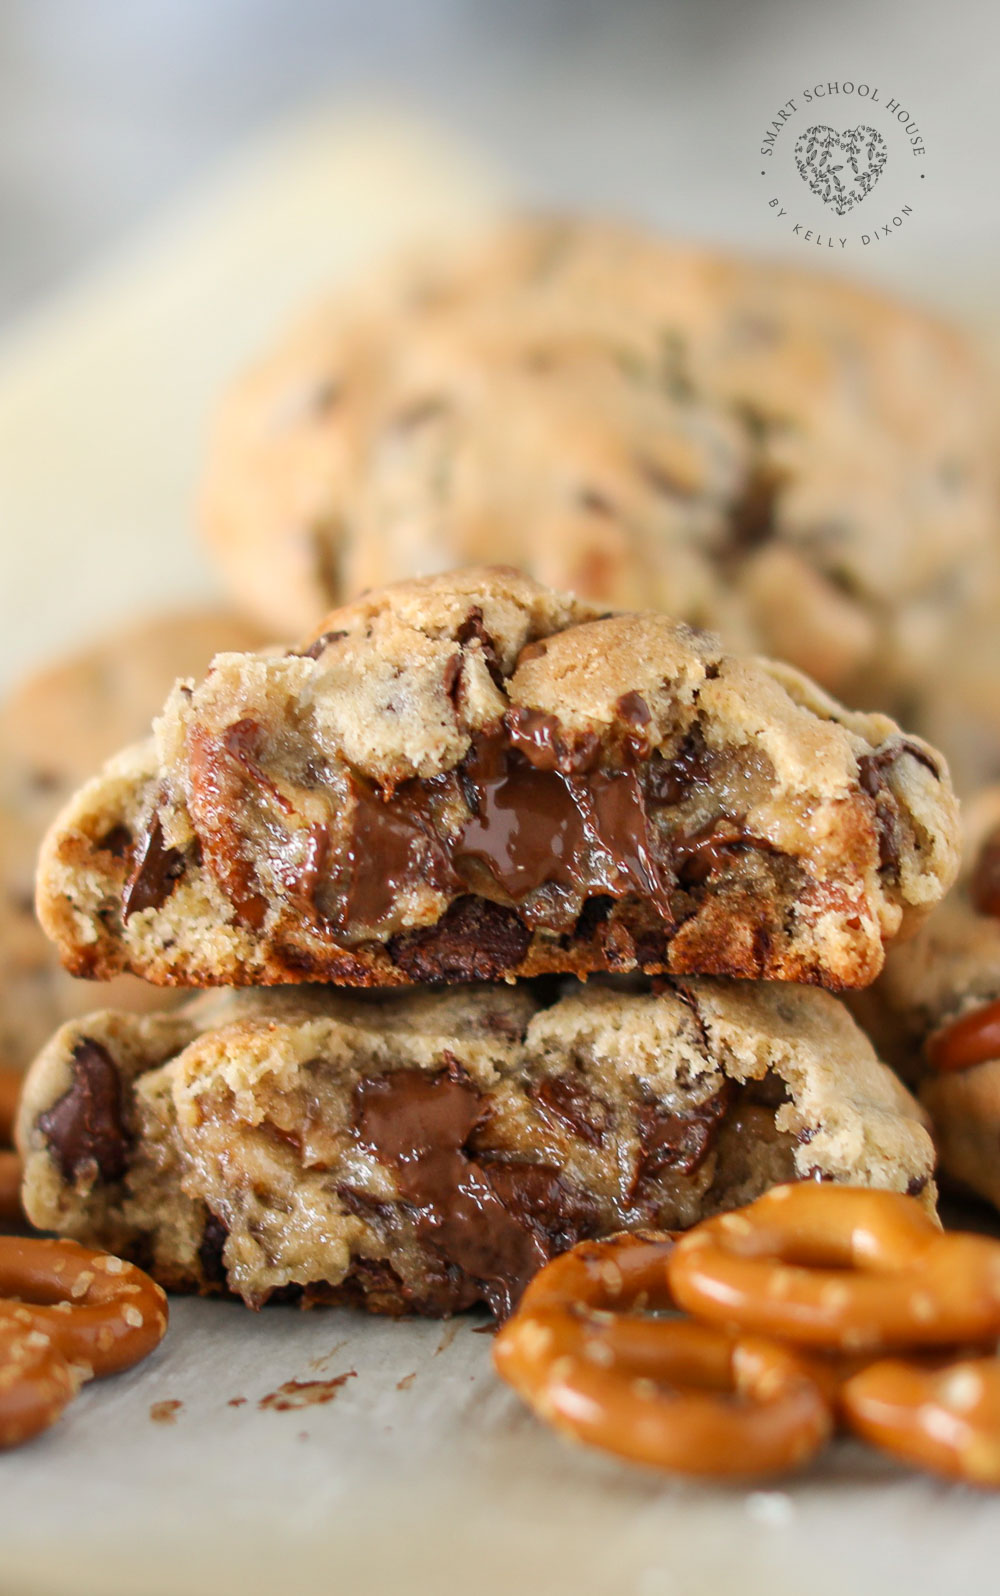 These ultra-thick bakery-style Chocolate Chip Pretzel Cookies are loaded with sweet and salty flavors everyone craves! The combination of melty chocolate and crunchy pretzels makes this one of the best and easiest cookies you will ever make!